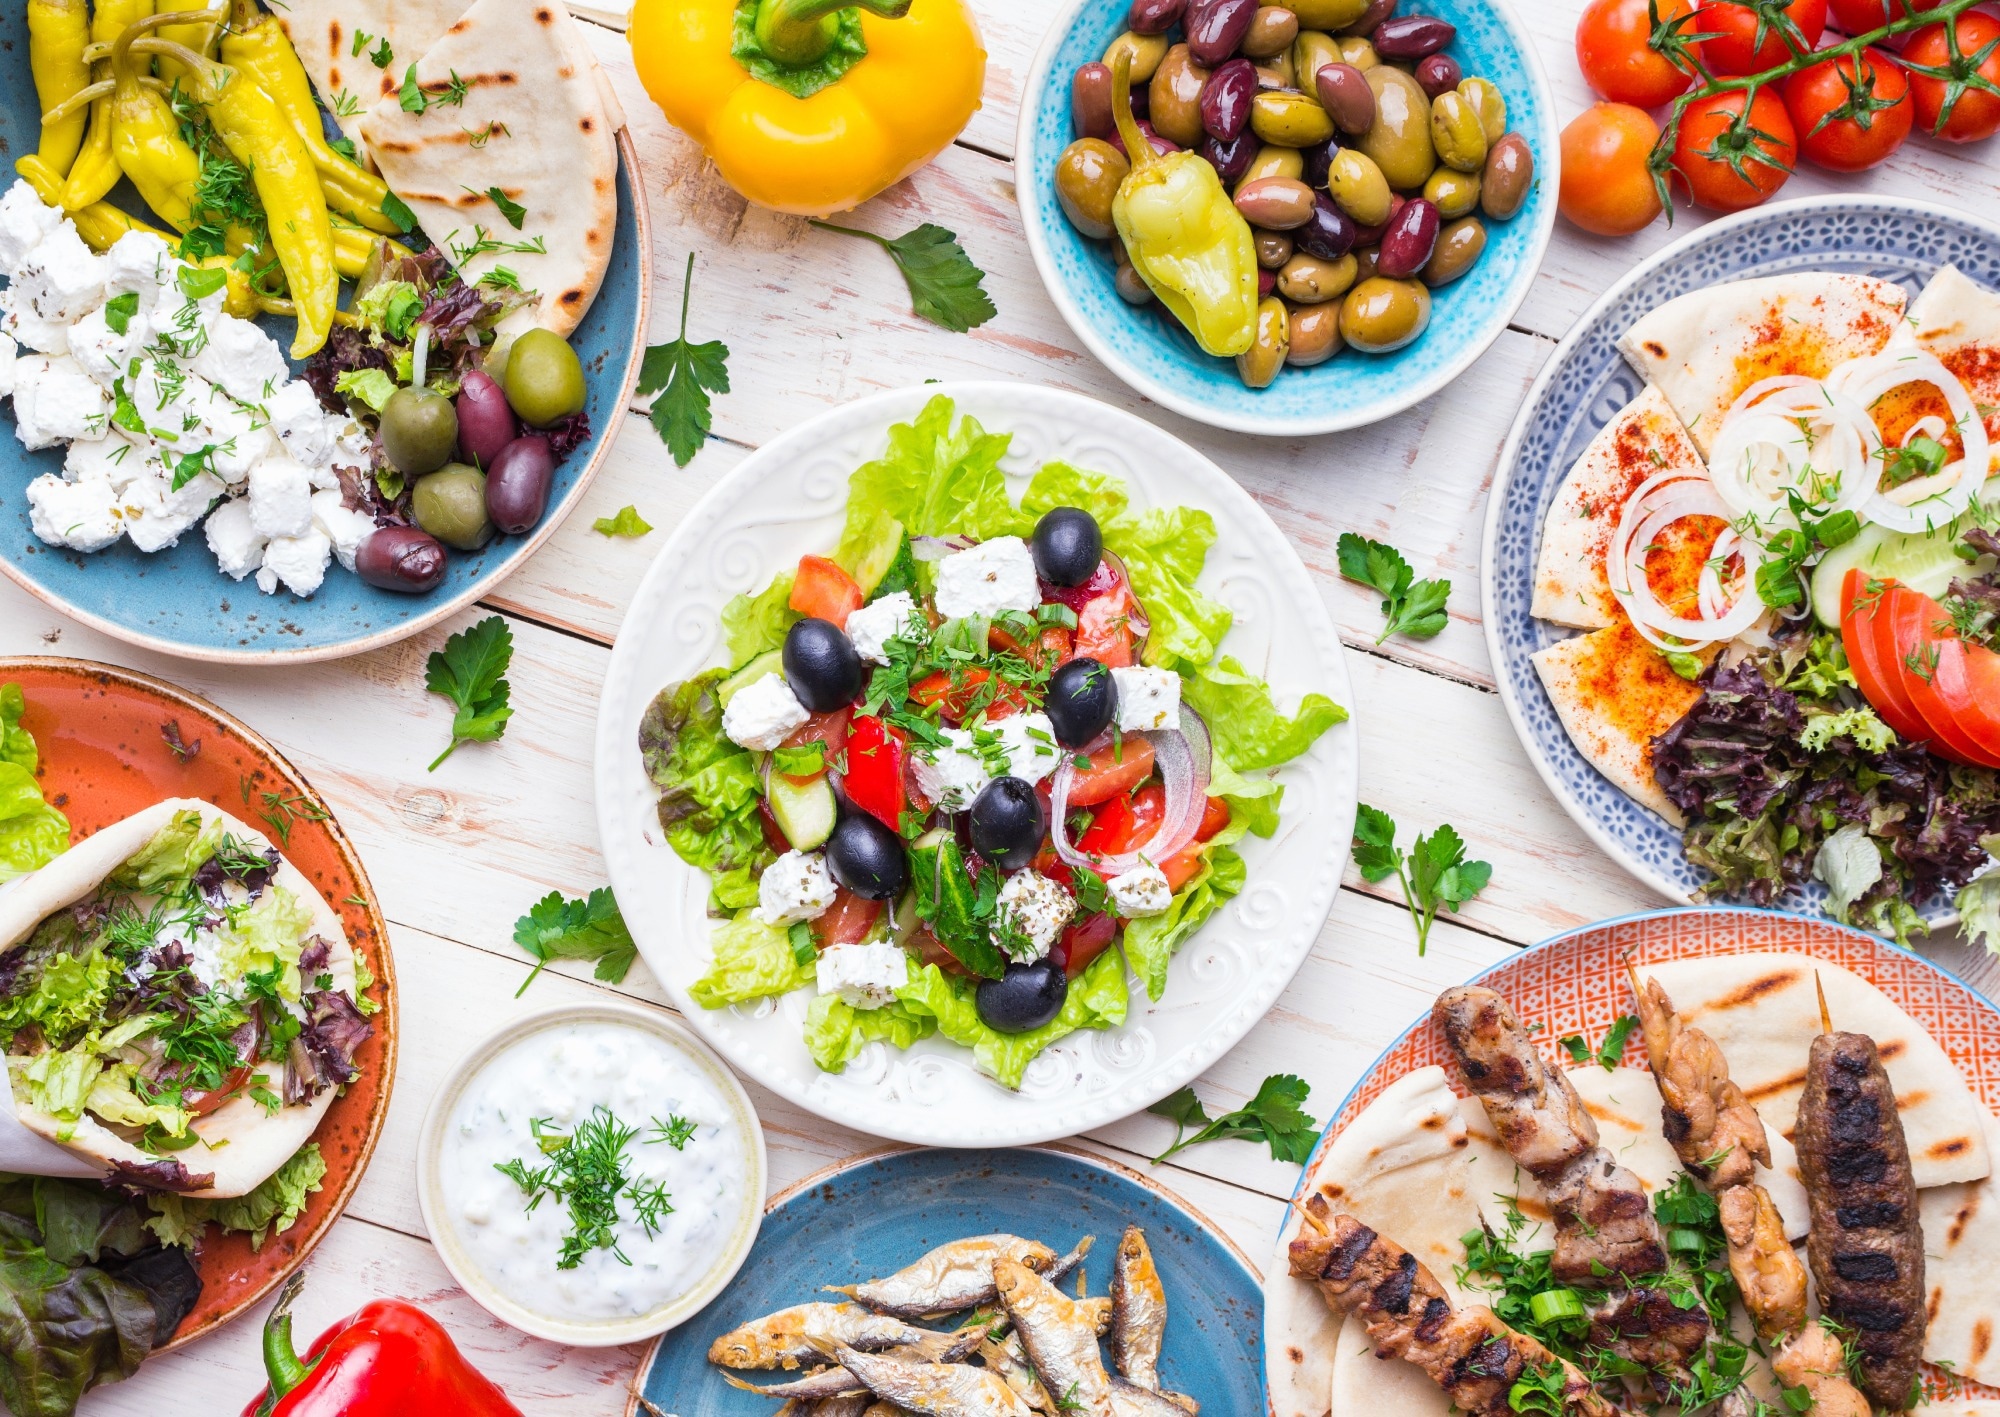 Study: Effects of a Mediterranean Diet Intervention on Maternal Stress, Well-Being, and Sleep Quality throughout Gestation—The IMPACT-BCN Trial. Image Credit: ElenaEryomenko/Shutterstock.com